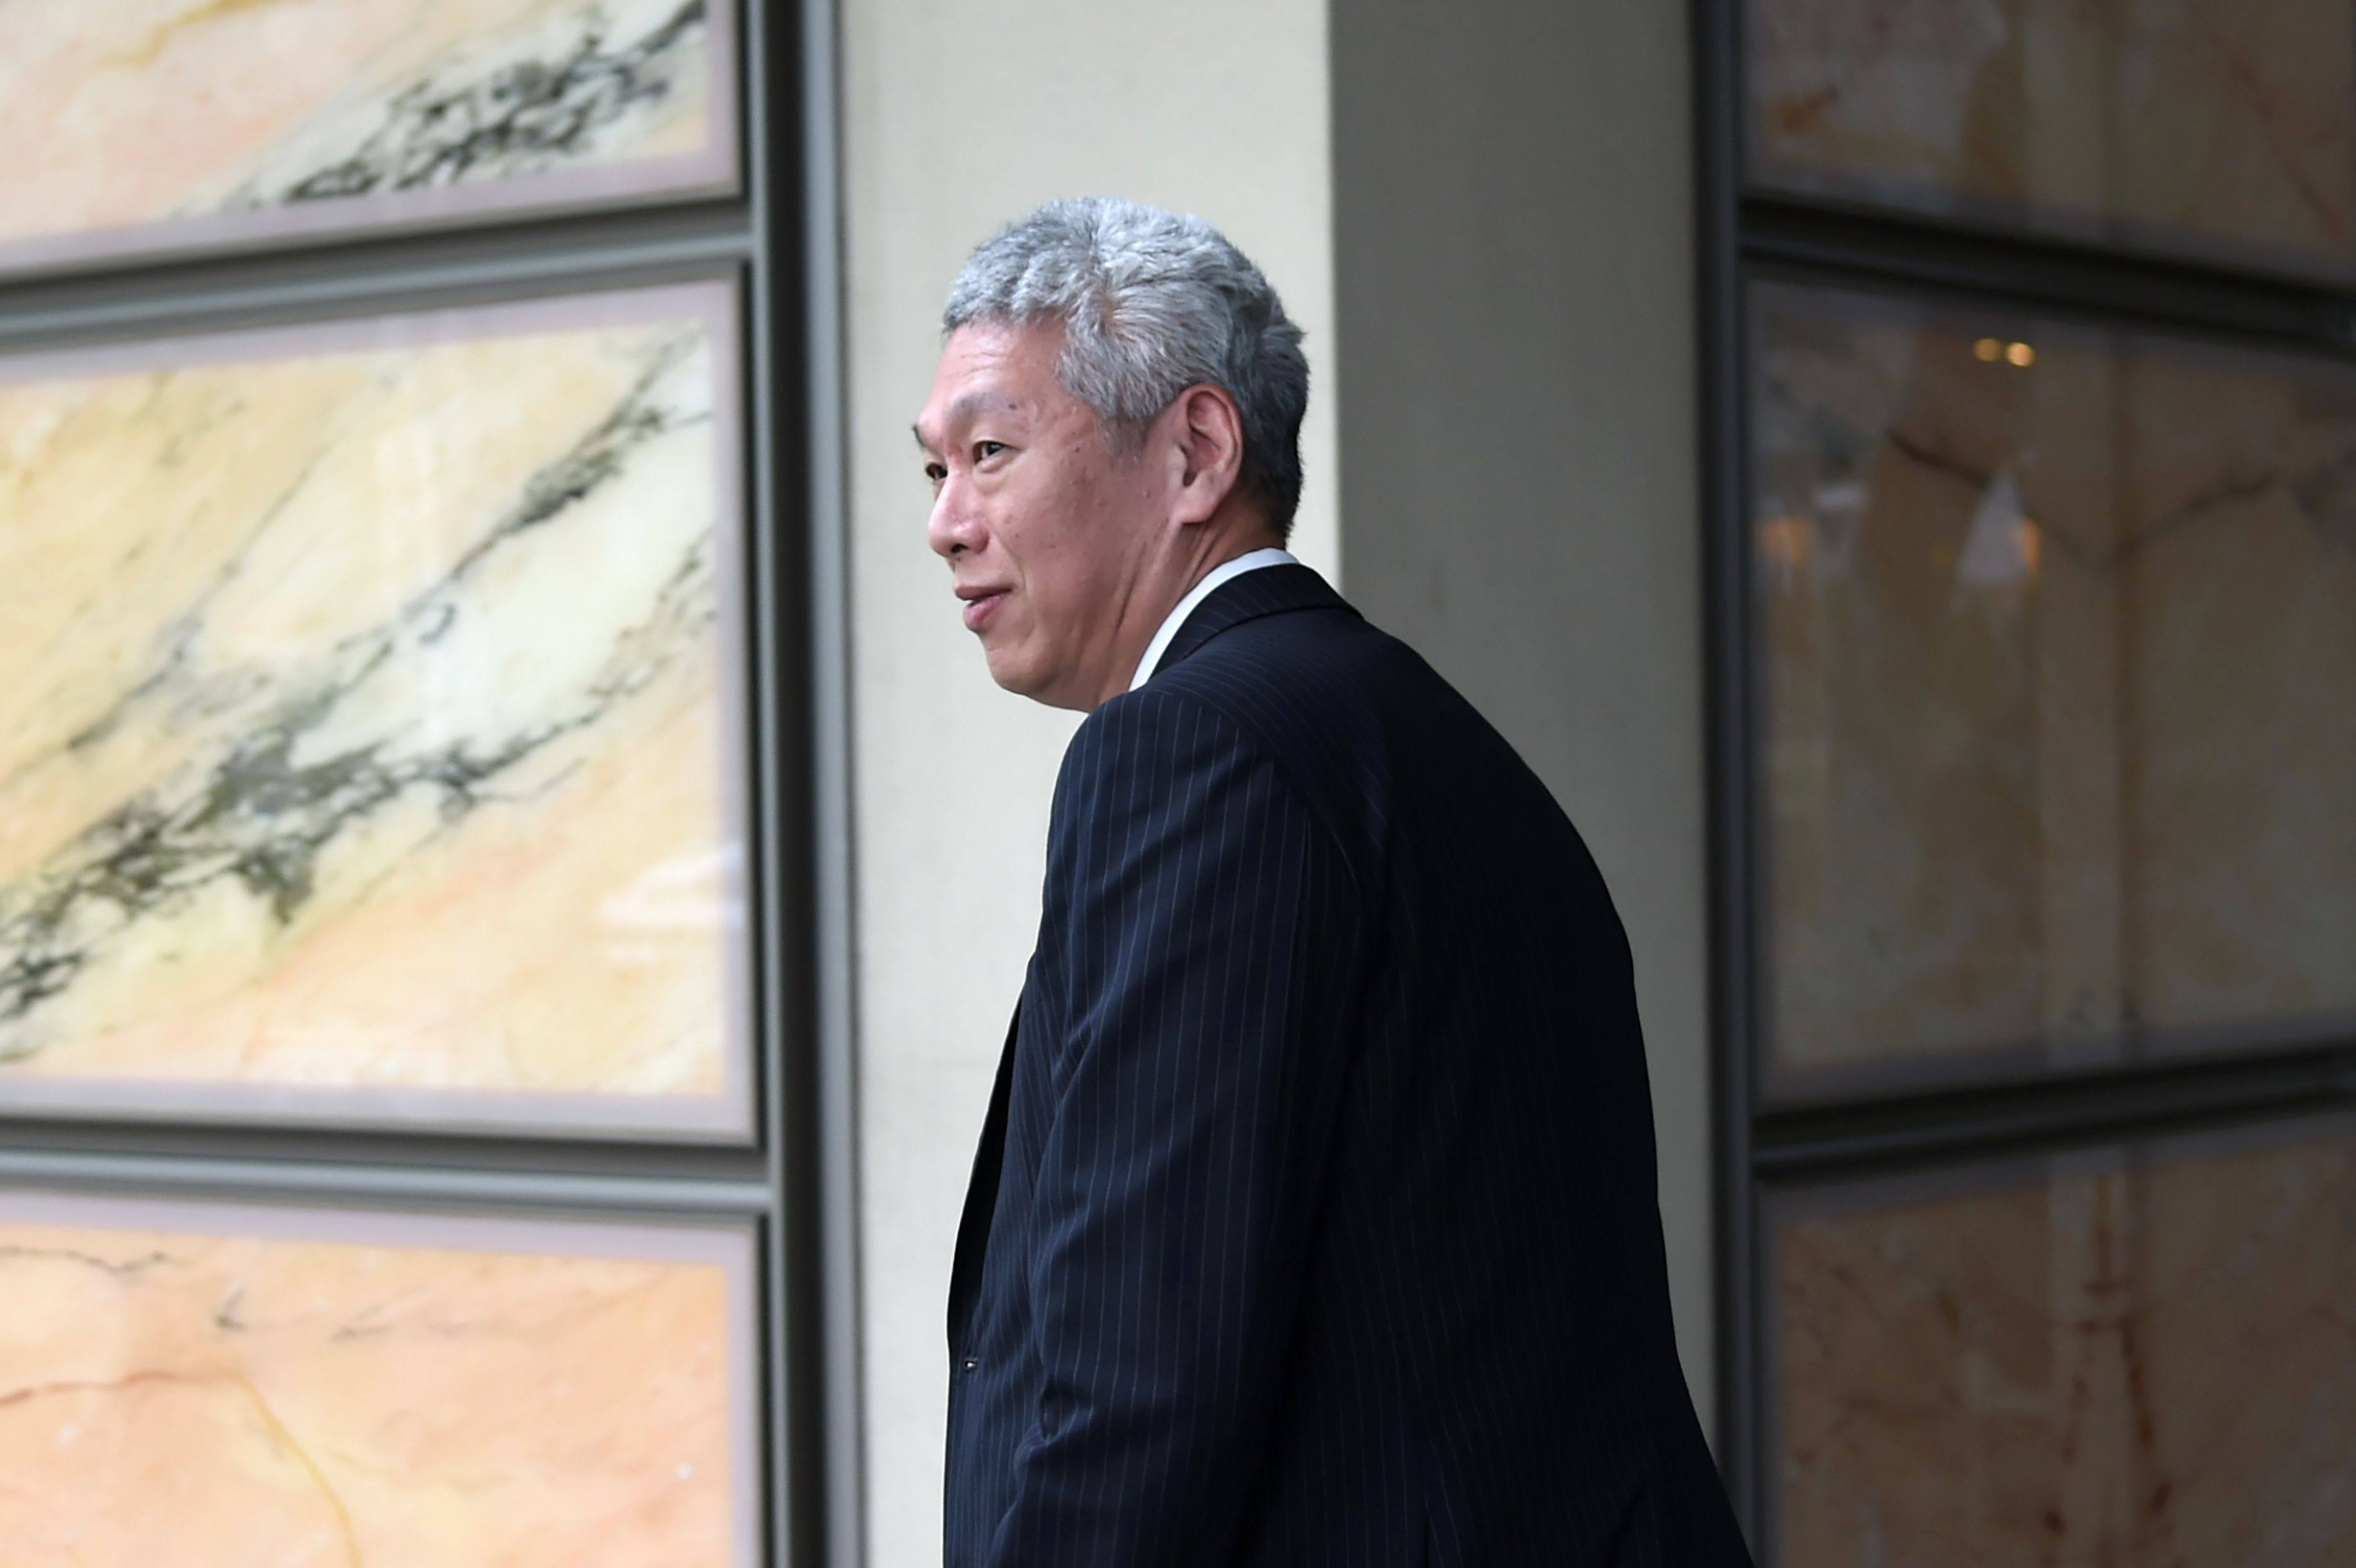 Lee Hsien Yang, younger brother of Singapore’s prime minister Lee Hsien Loong. Photo: AFP